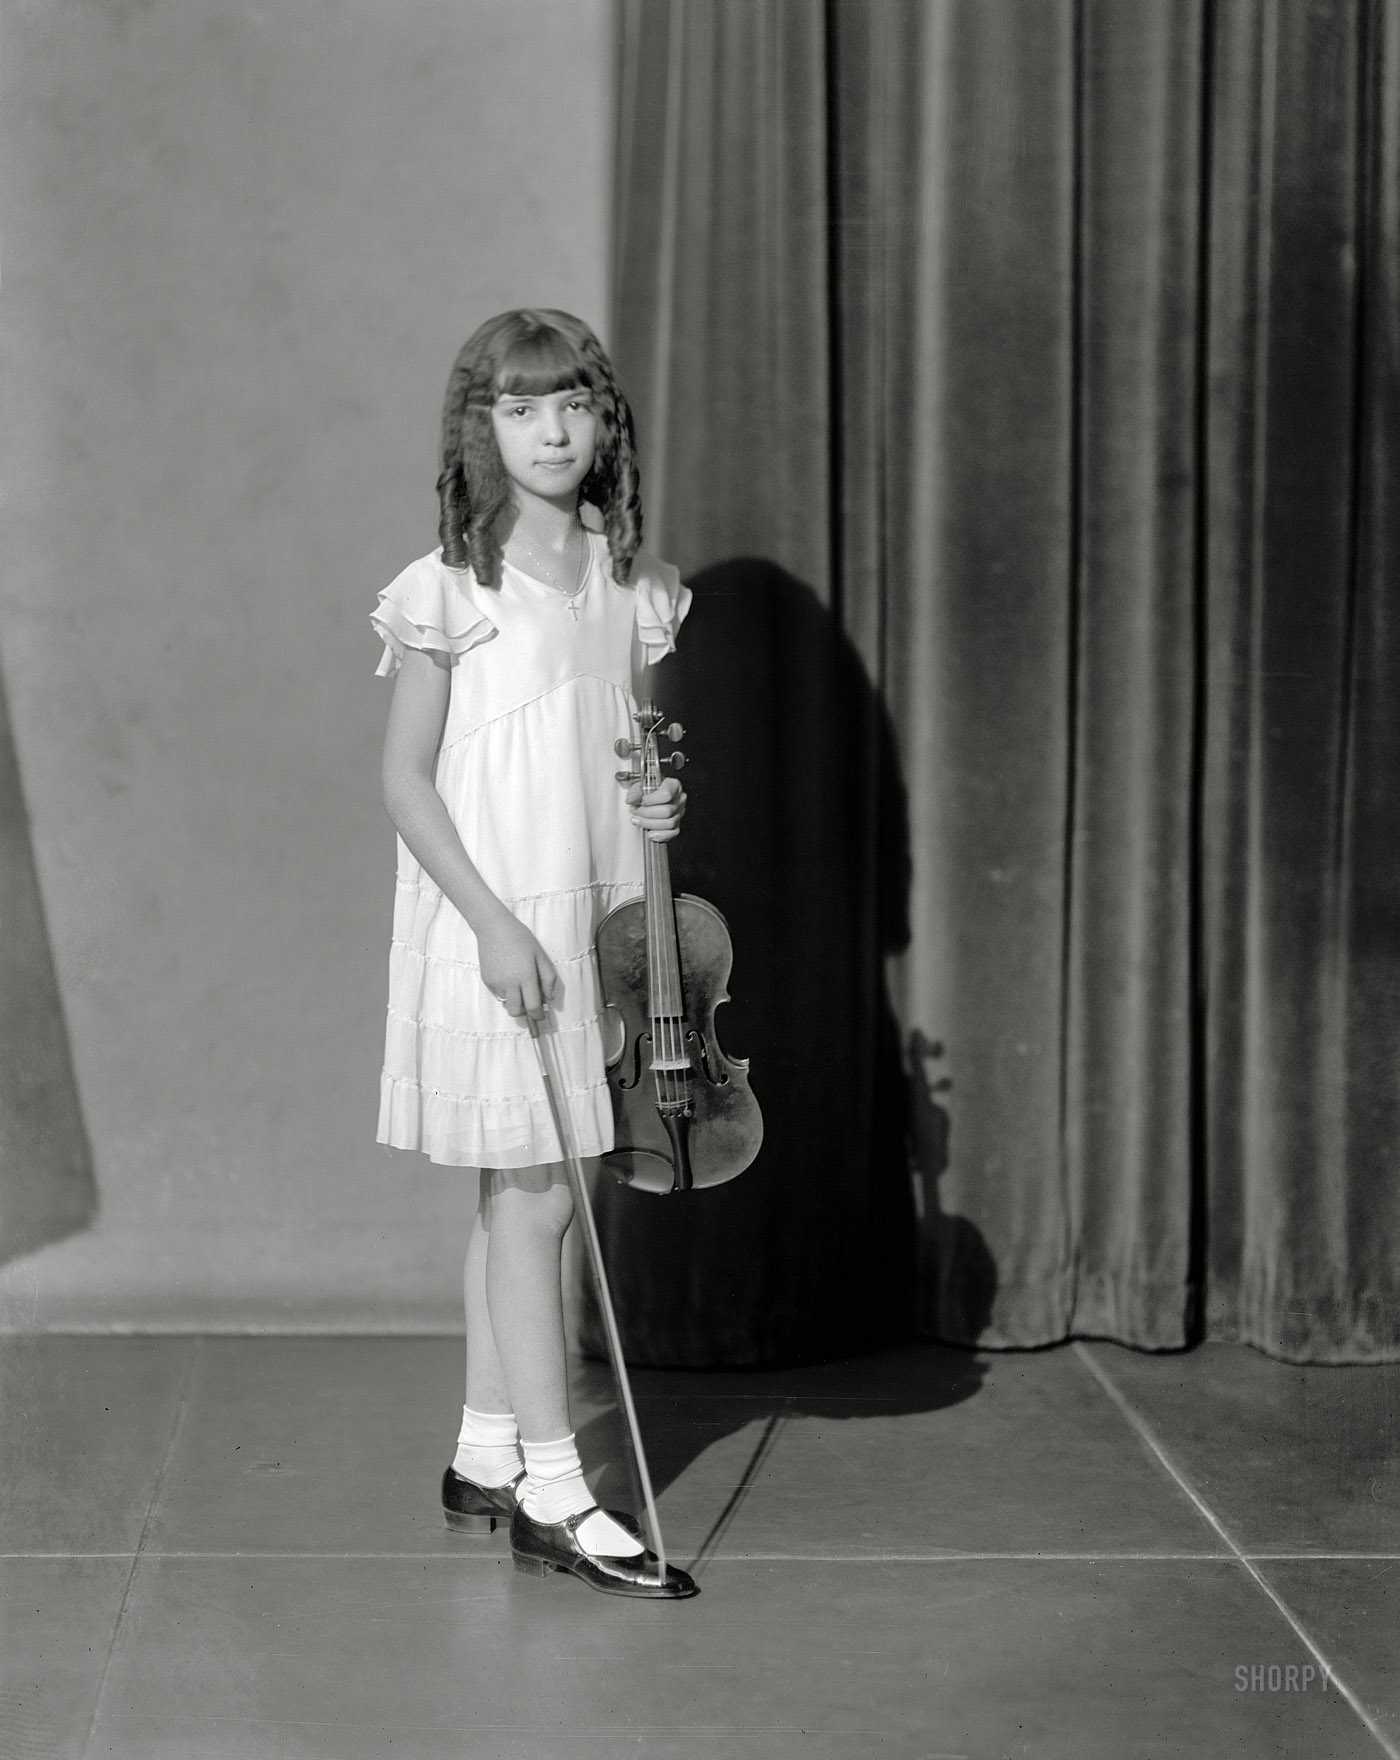 Washington, D.C., 1933. "Miss Gloria Perkins, portrait." As a 10-year-old violin prodigy, Gloria played with the National Symphony Orchestra. View full size.